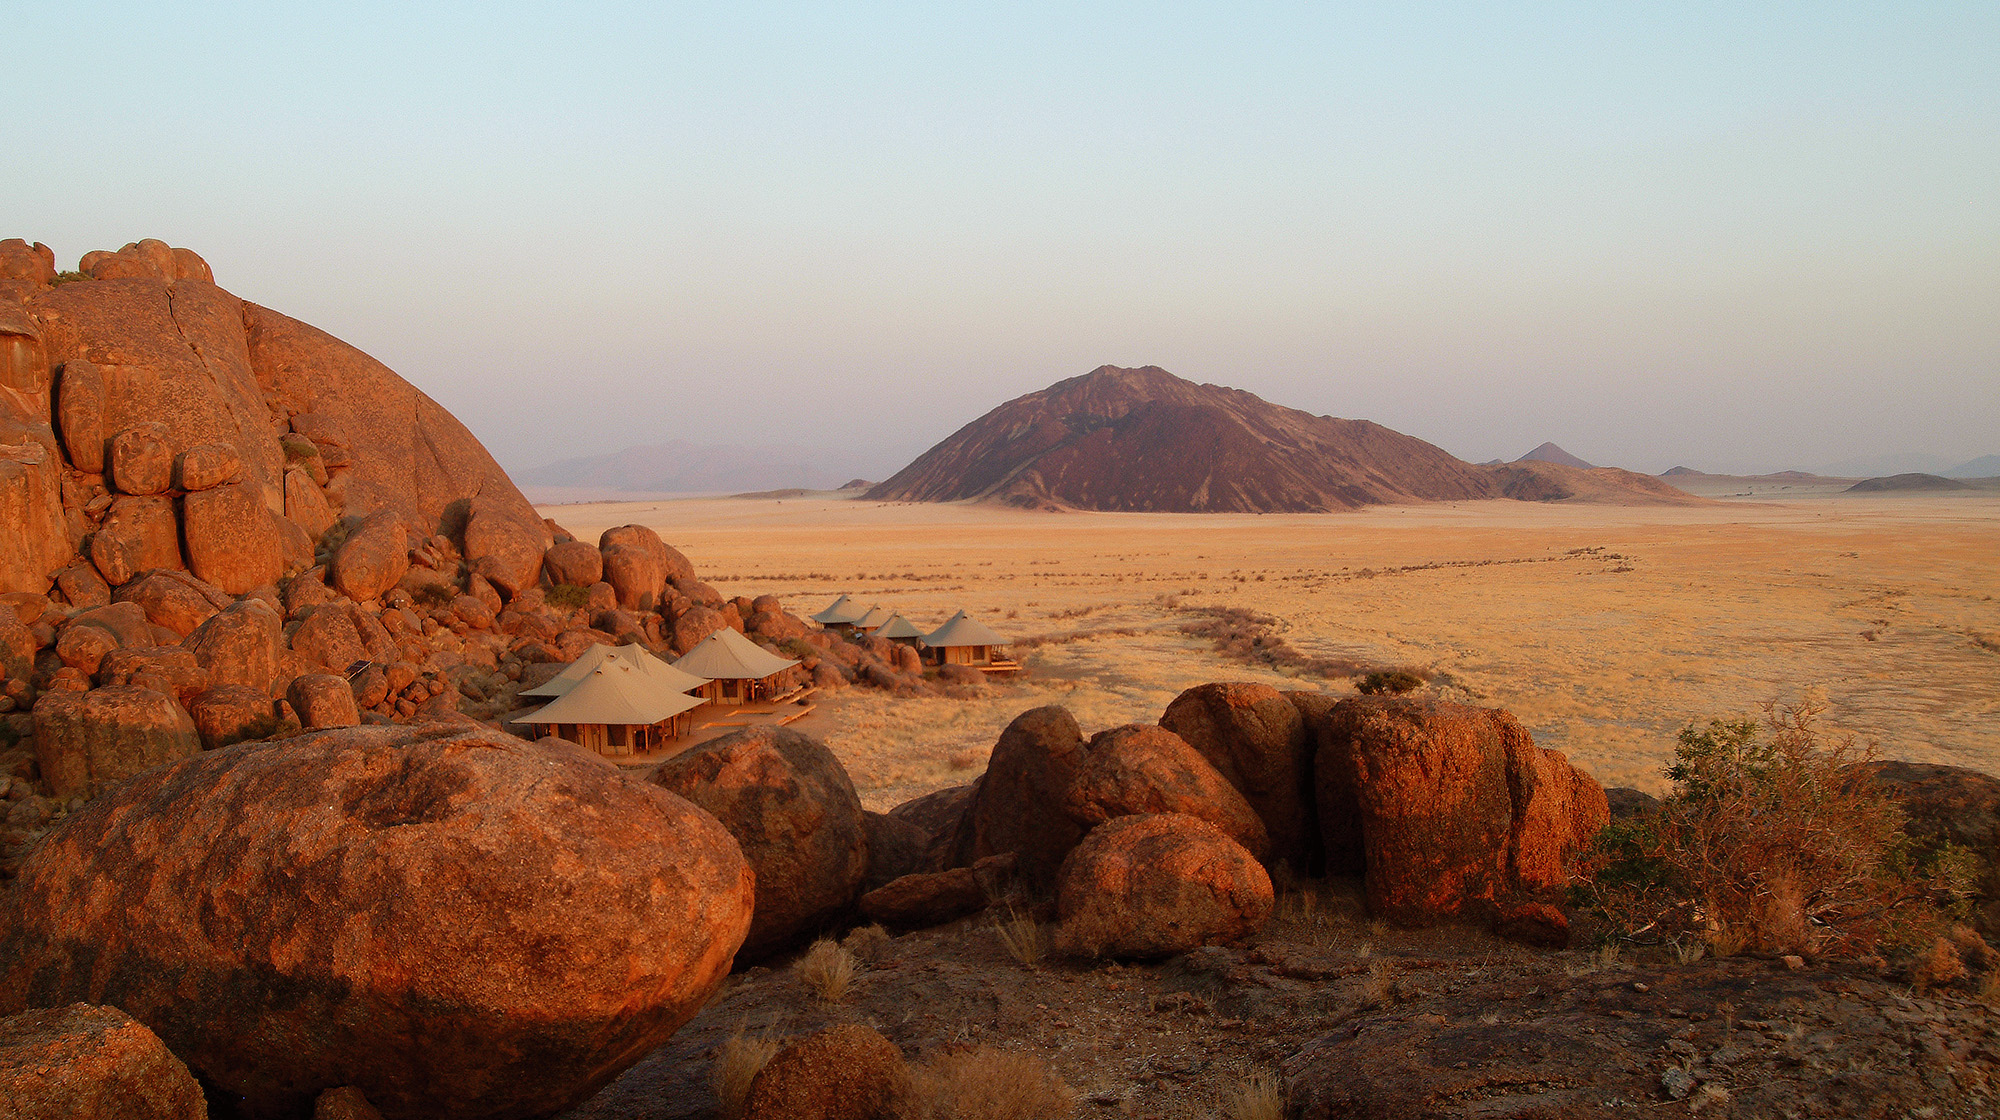 Boulders camp - Wolwedans collection - Namibia - header image